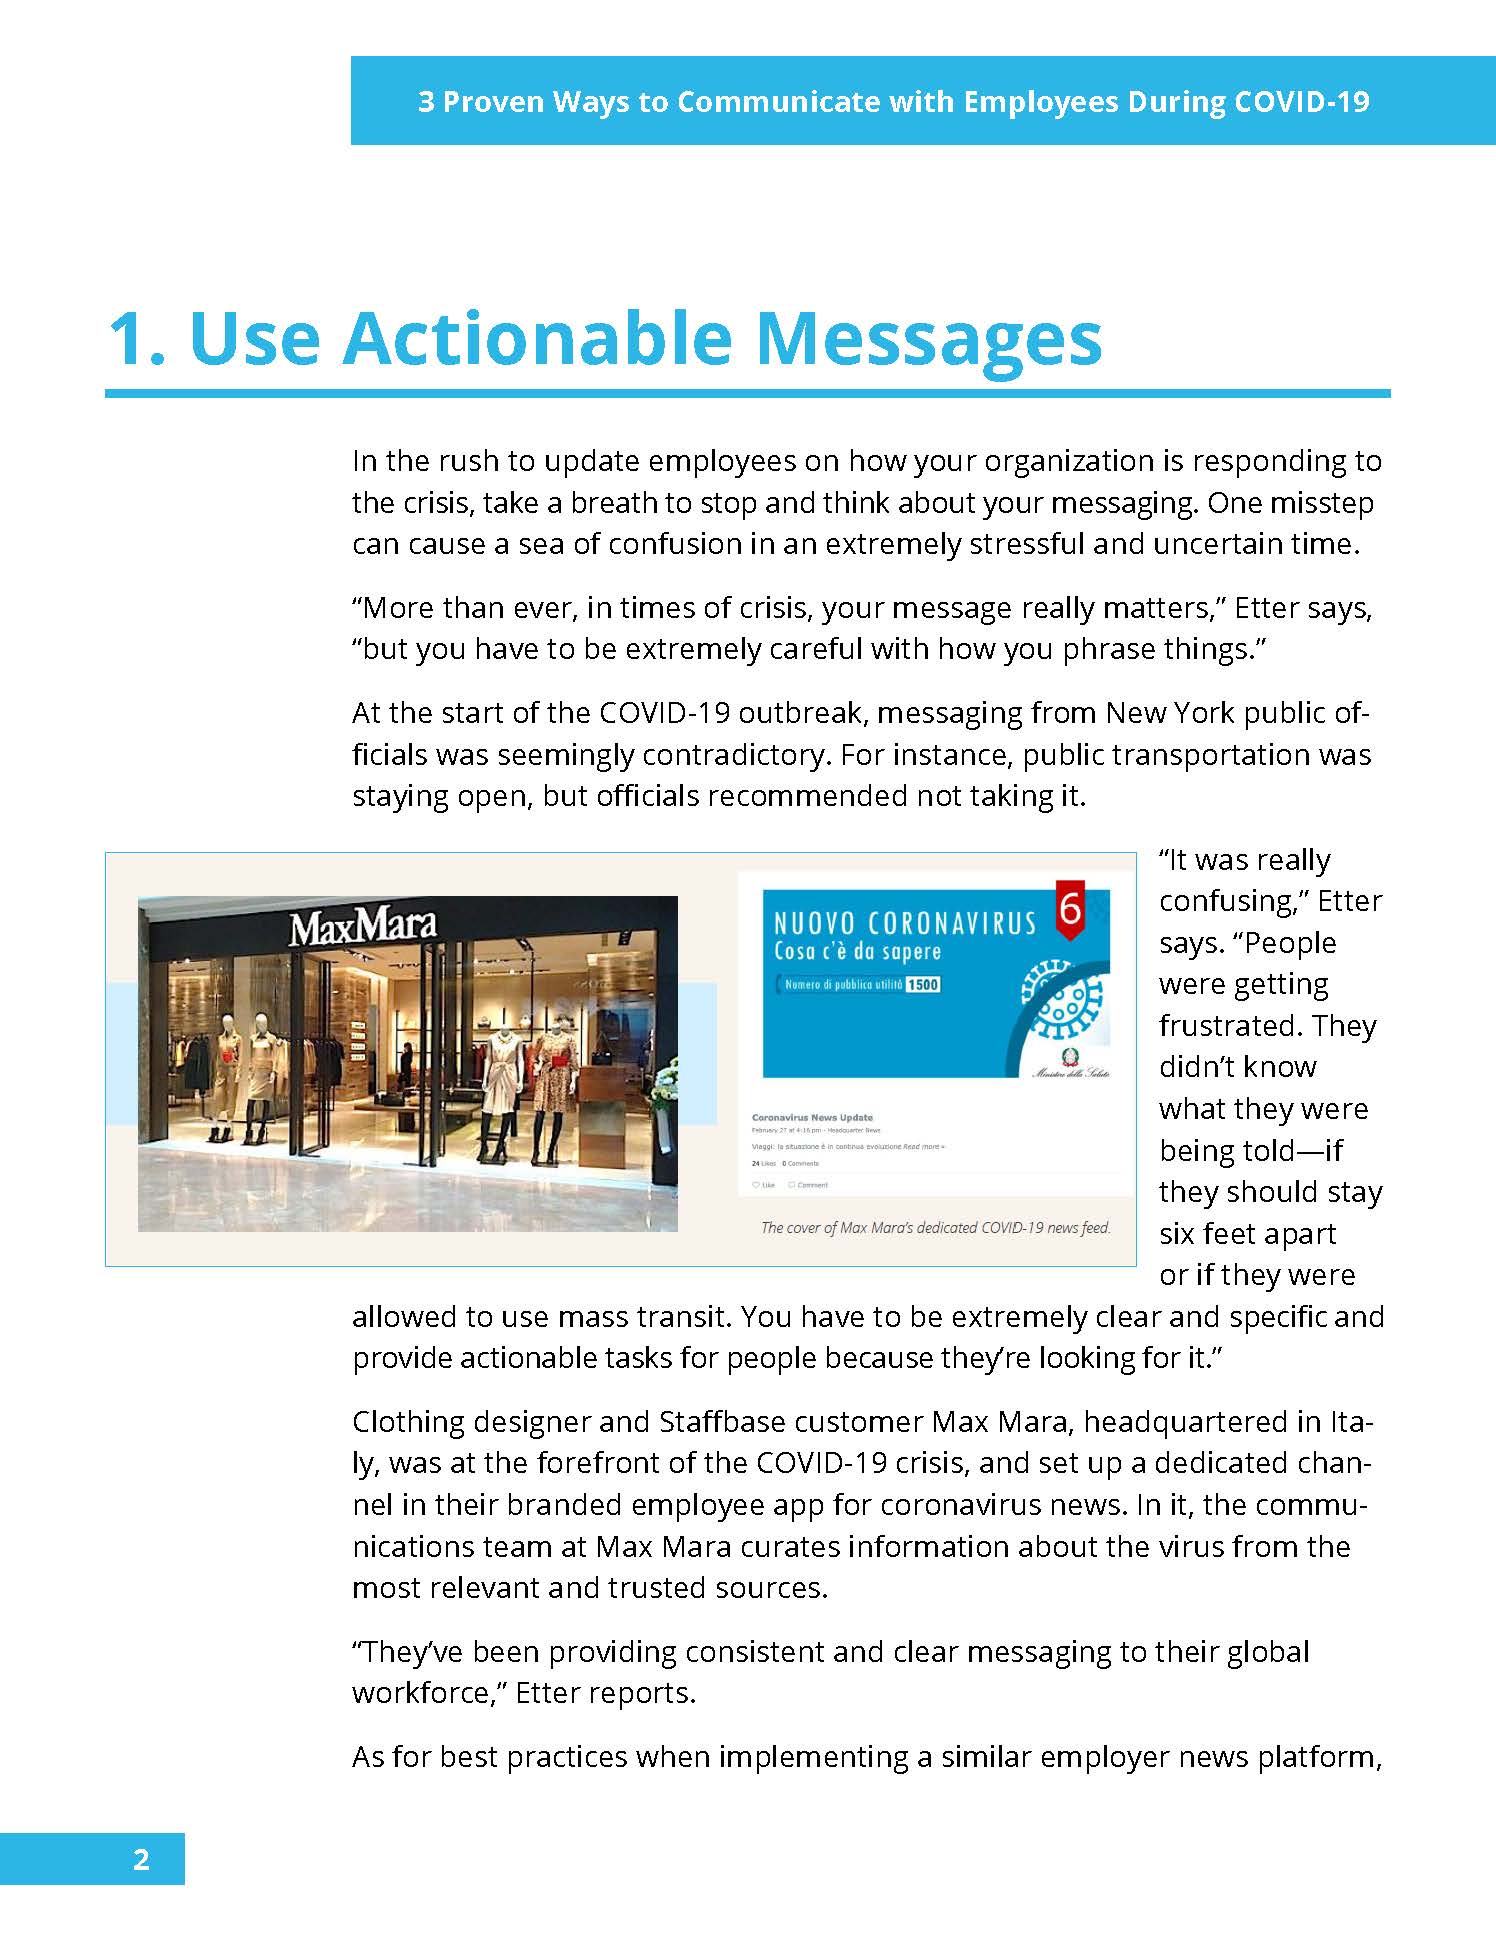 3 Proven Ways to Communicate with Employees During COVID-19 page 3